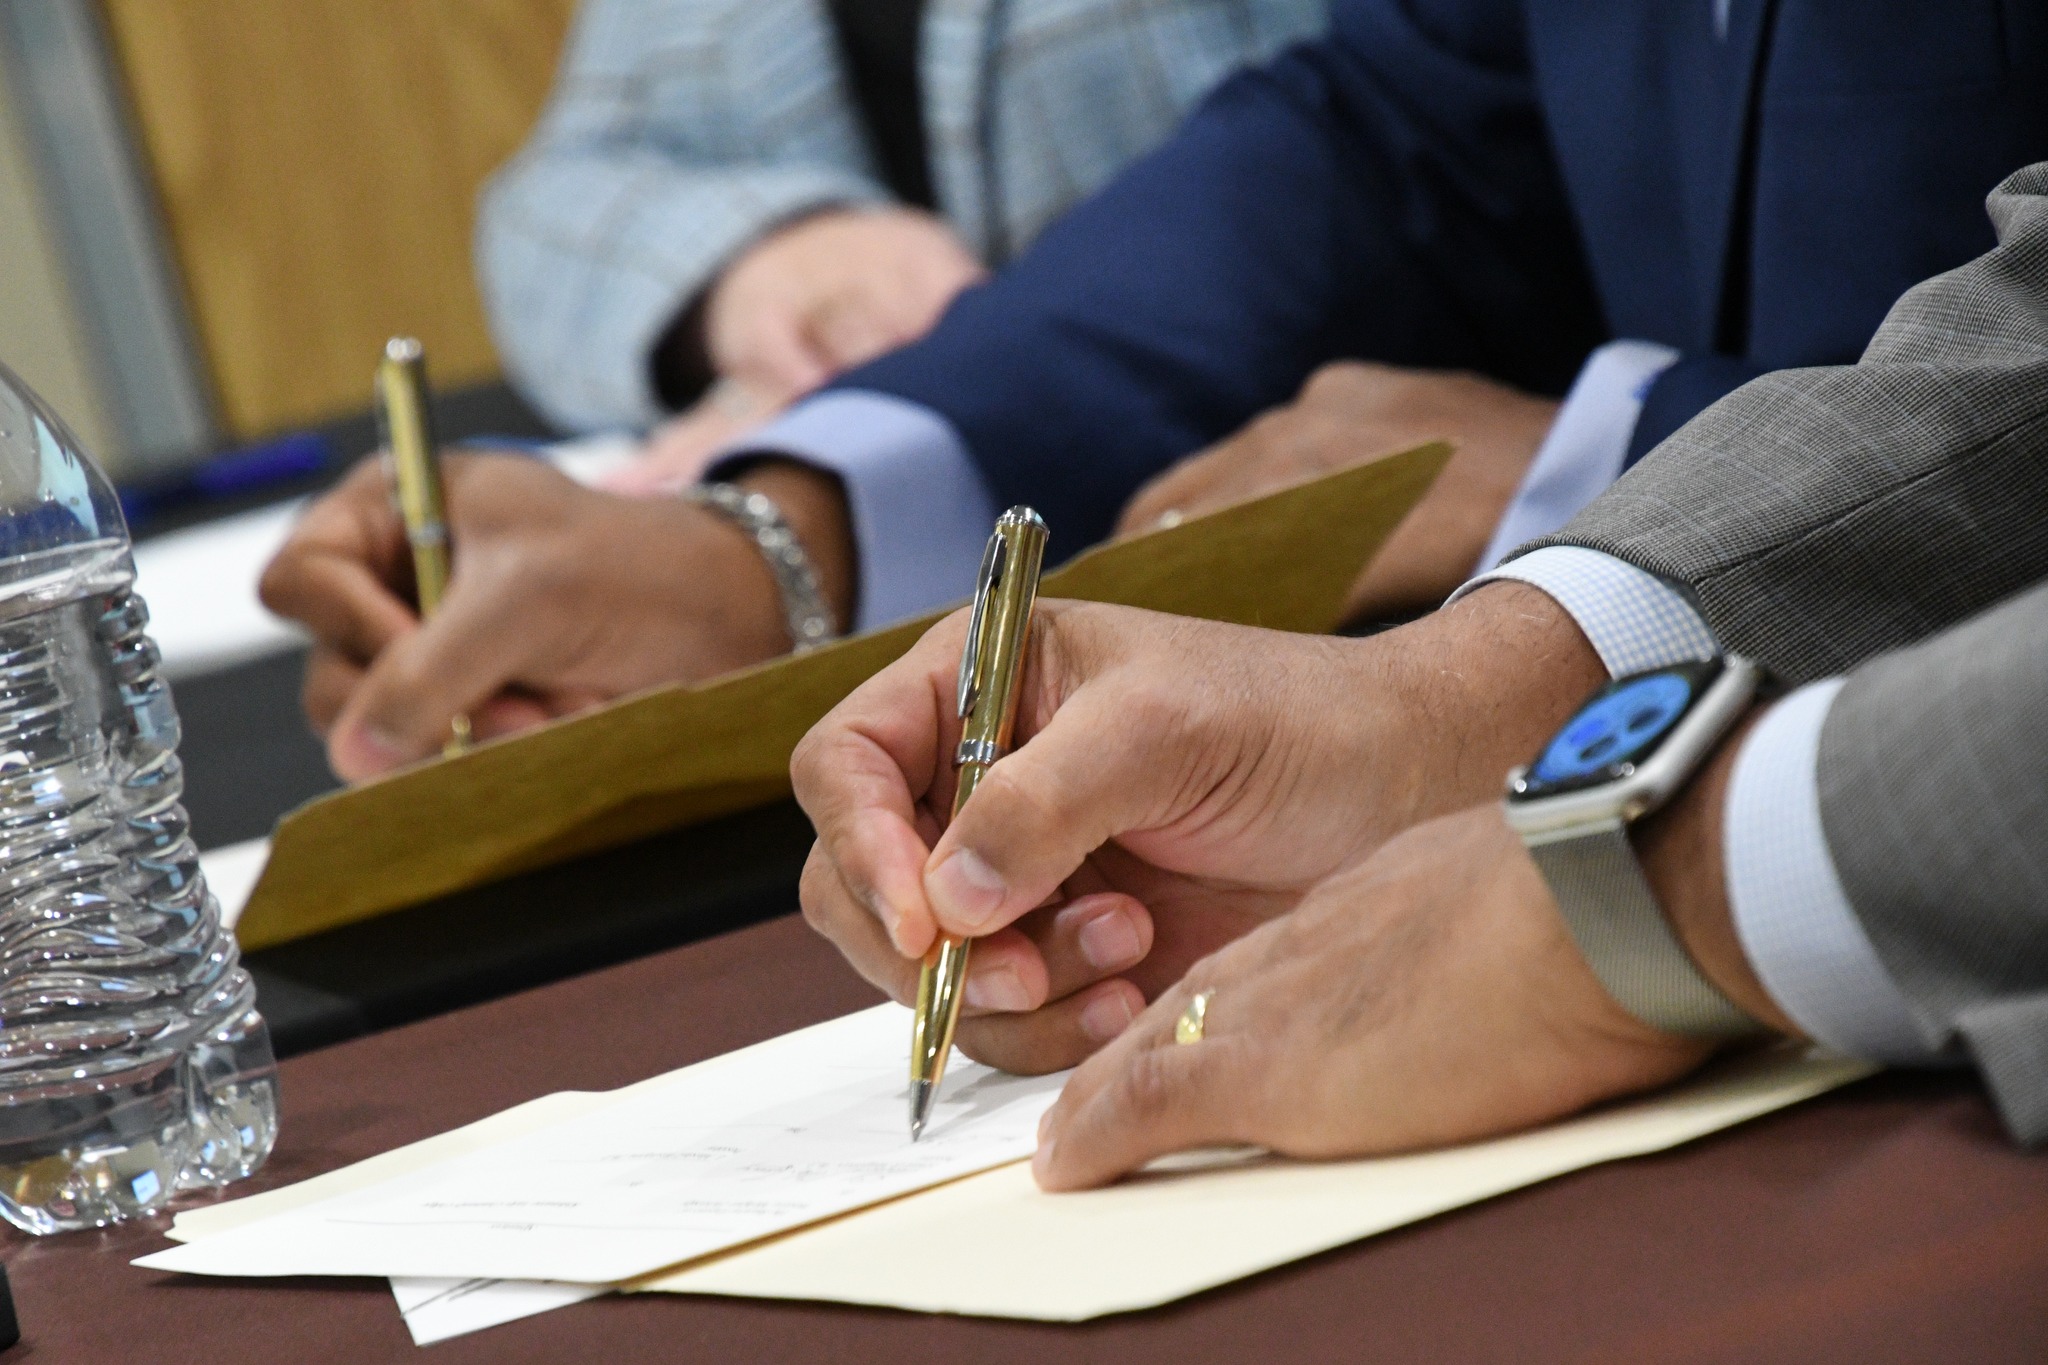 Signing the agreement: Pictured are the hands of, from left, L. Marshall Washington, Ph.D., president of Kalamazoo Valley, and Edward Montgomery, Ph.D., president of Western Michigan University